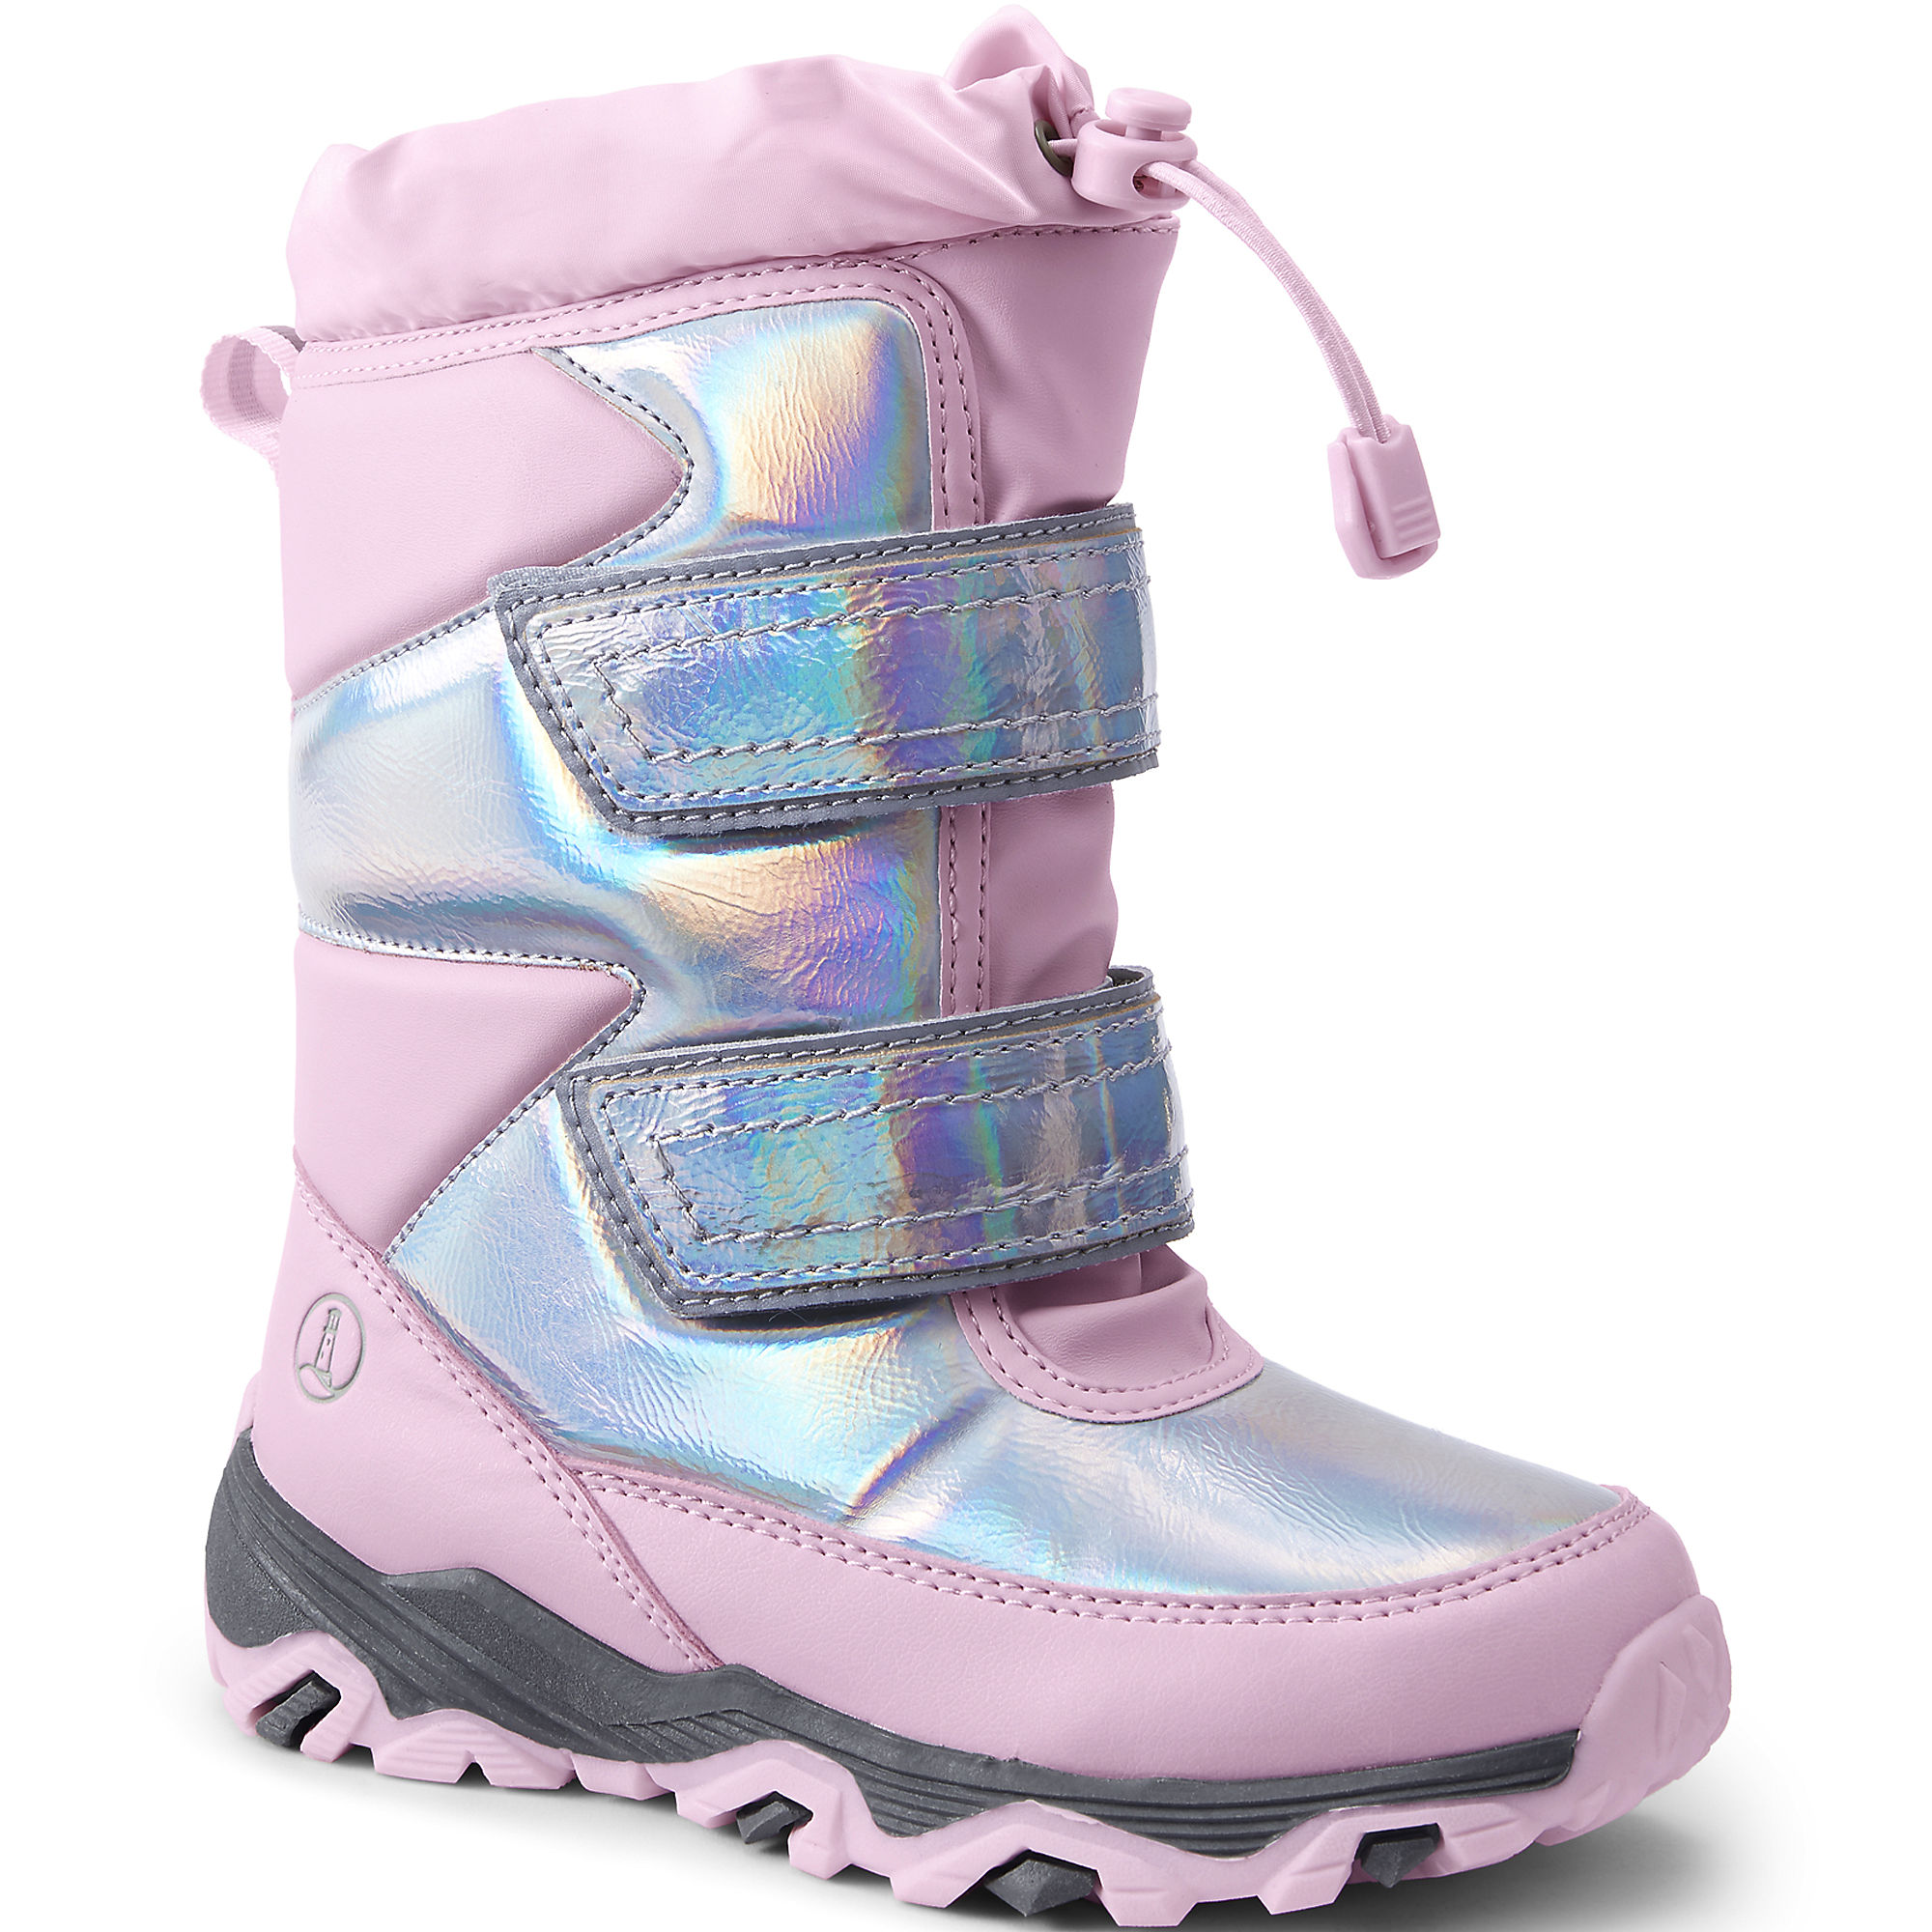 Lands End Snow Boots + Great Deals On Them & Why We Love Them ...